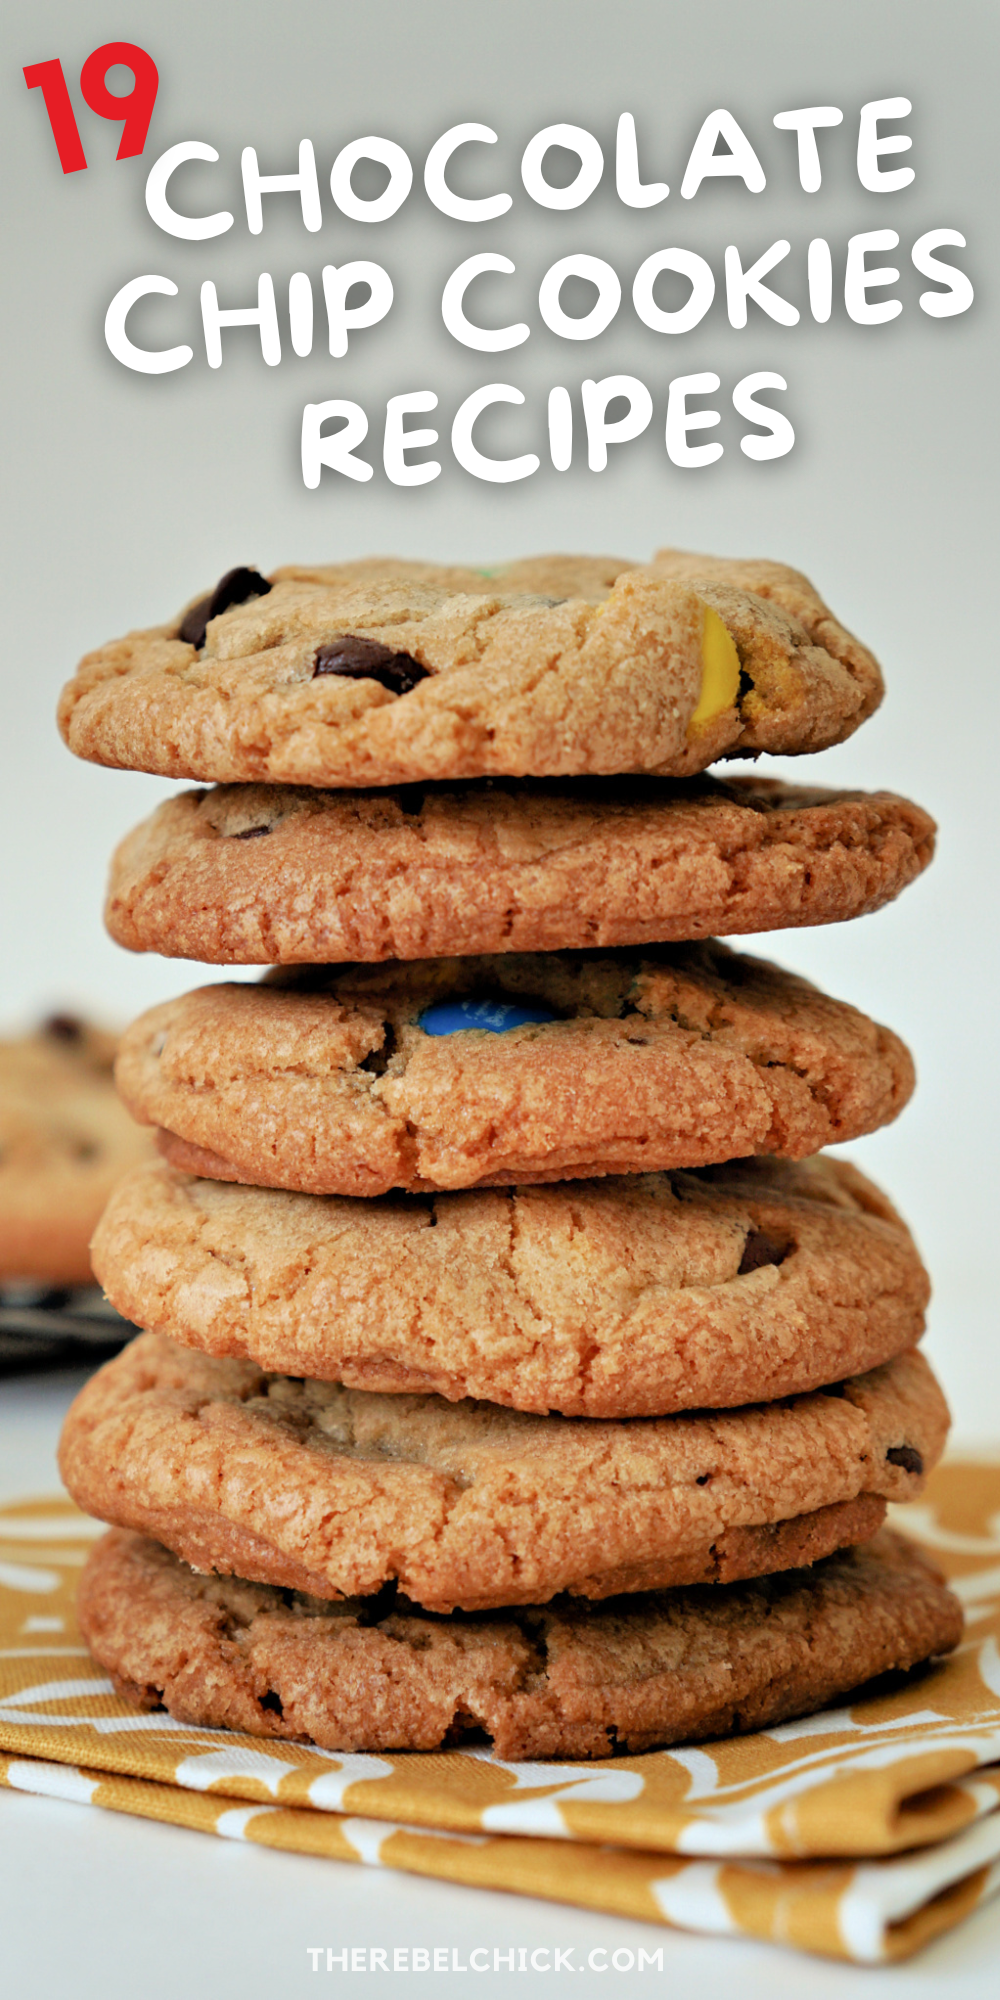 19 Chocolate Chip Cookie Recipes